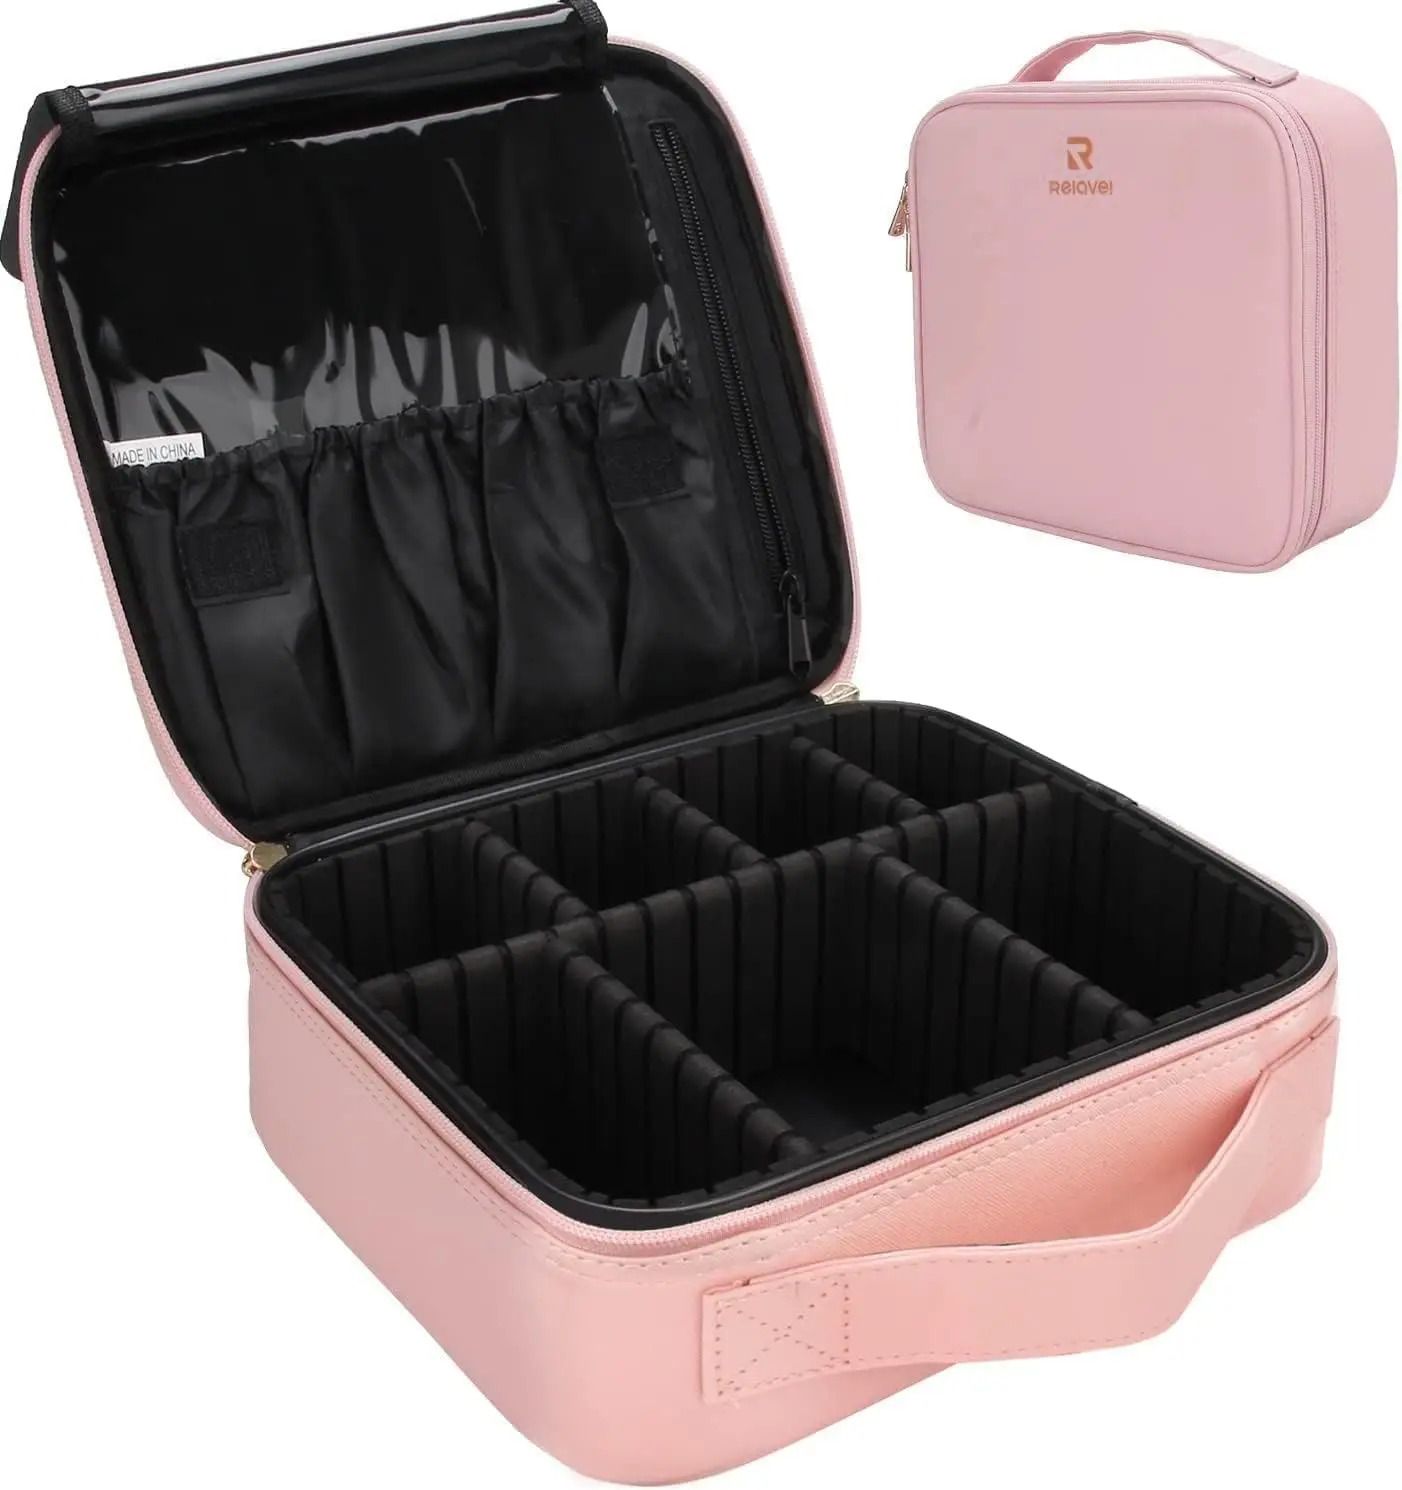 travel-makeup-train-case-makeup-cosmetic-case-organizer-portable-artist-storage-bag-with-adjustable-dividers-for-cosmetics-makeu